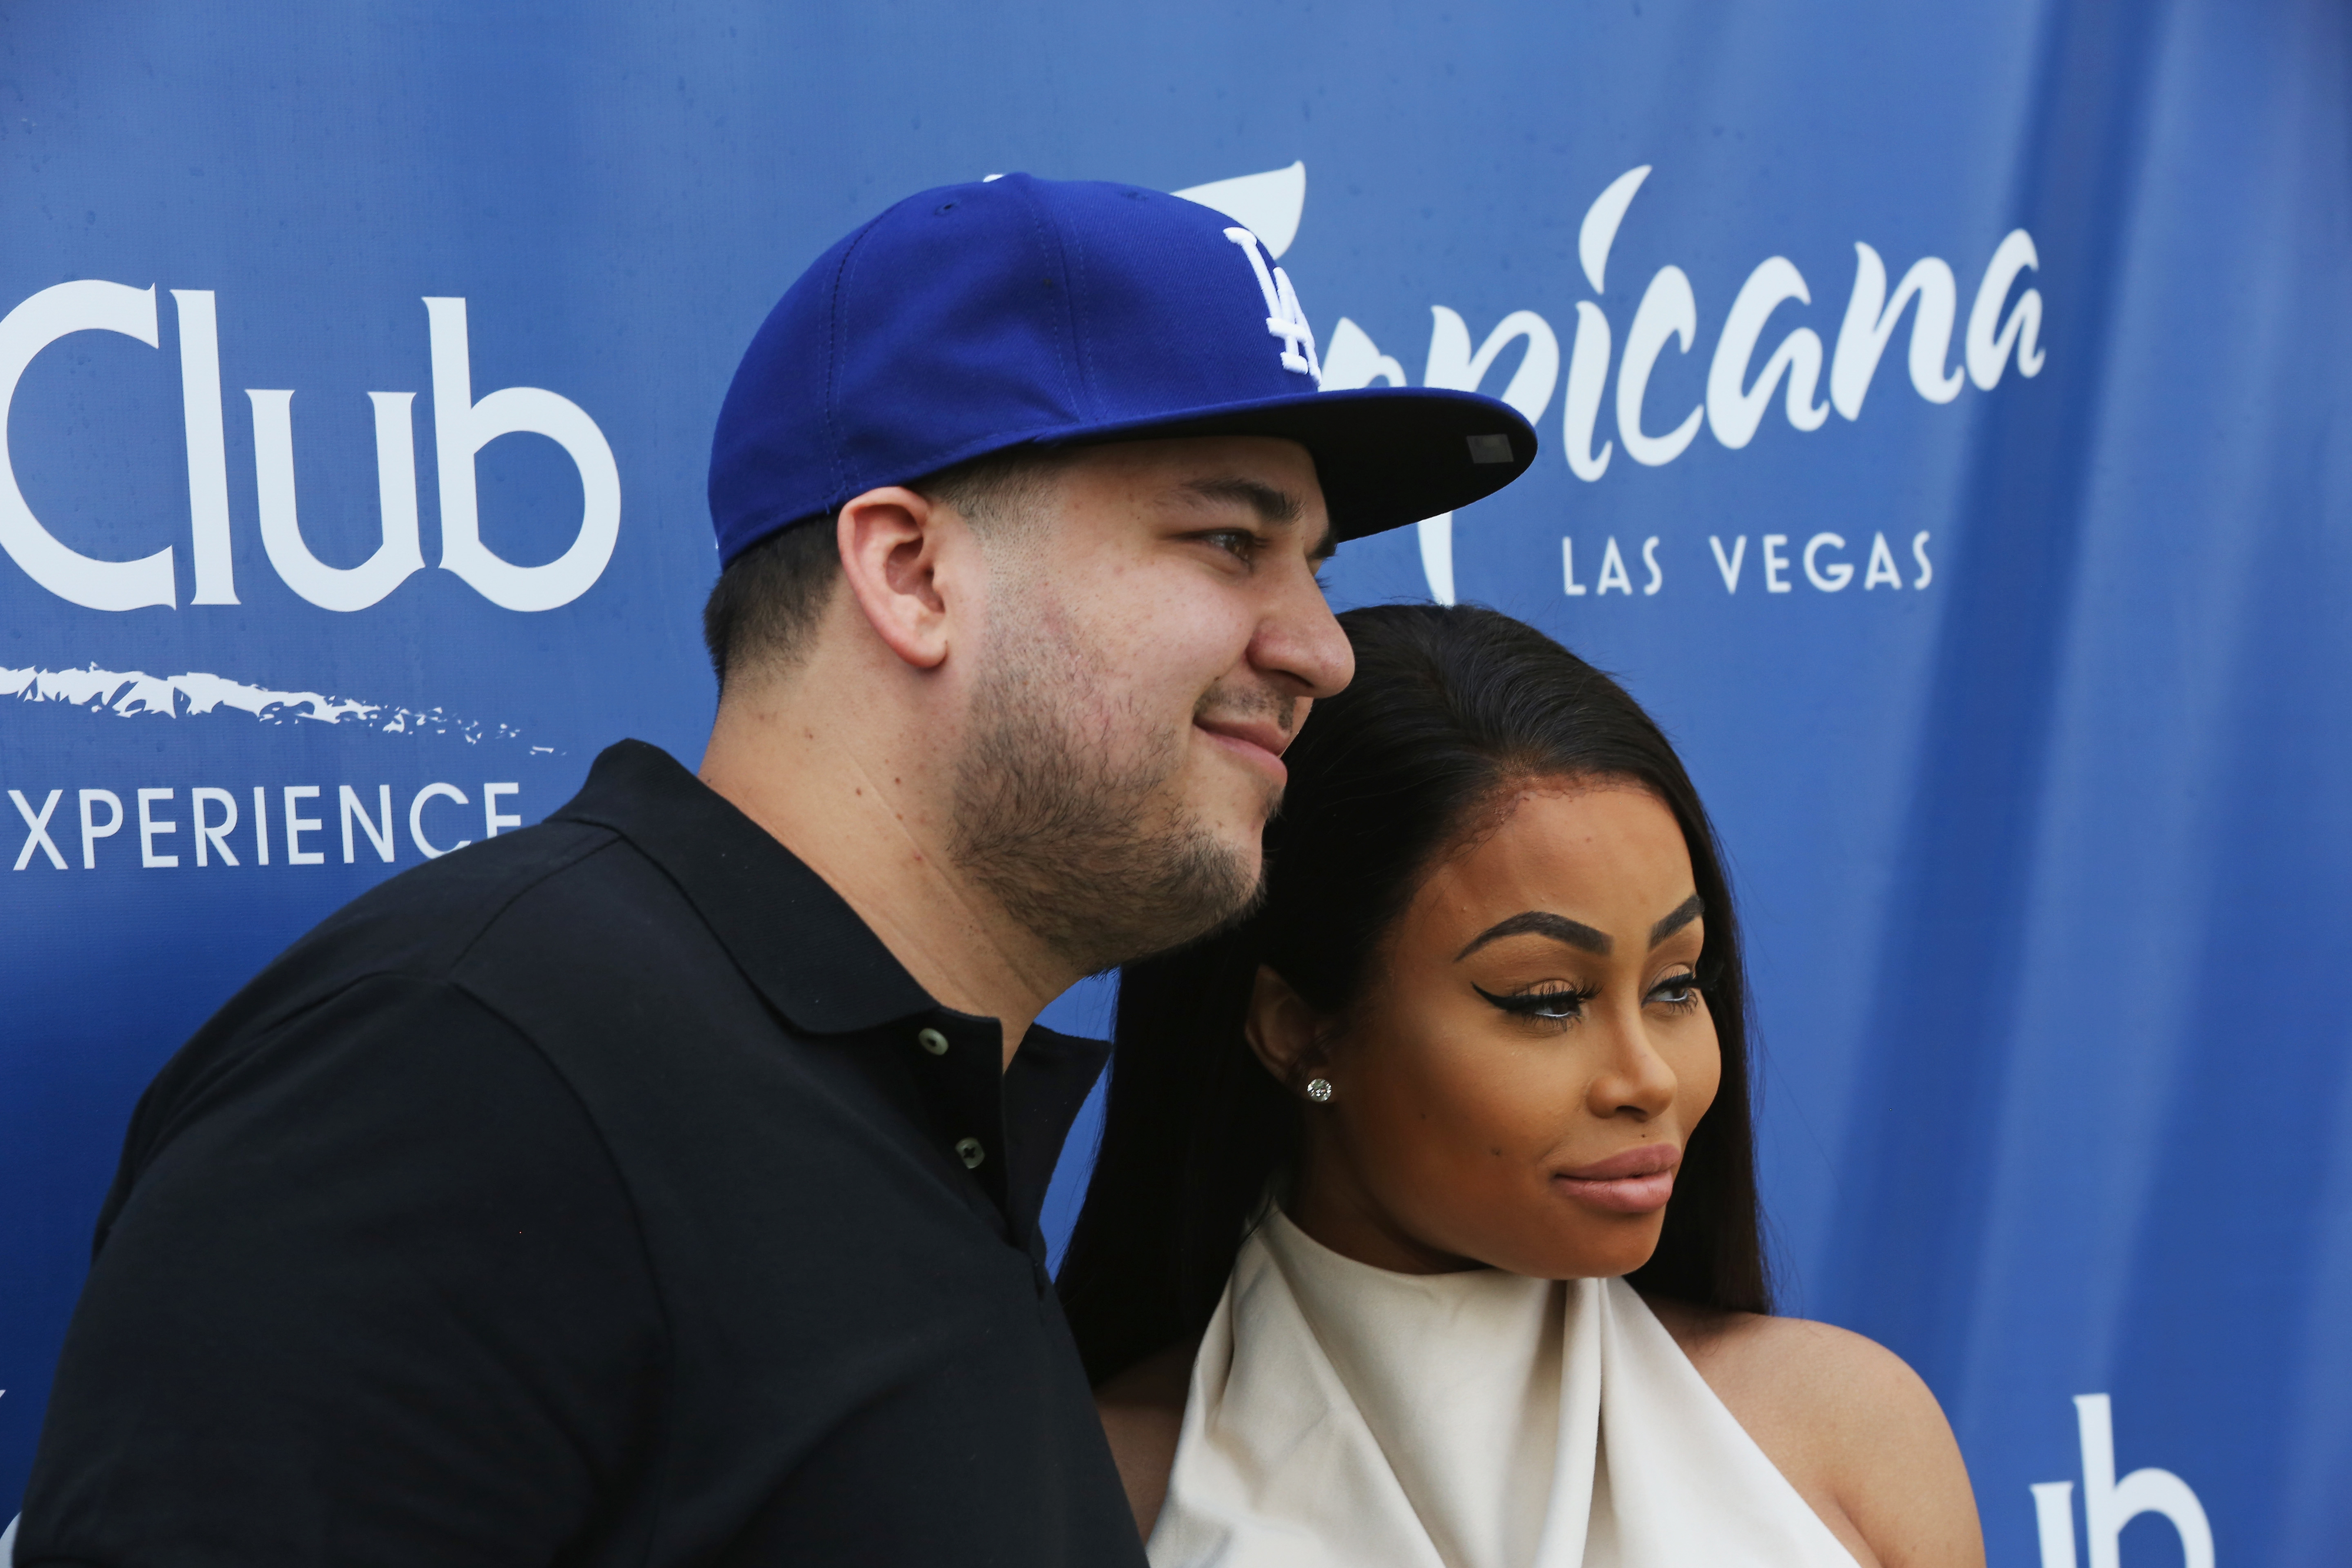 Close-up of Rob and Blac Chyna at a media event